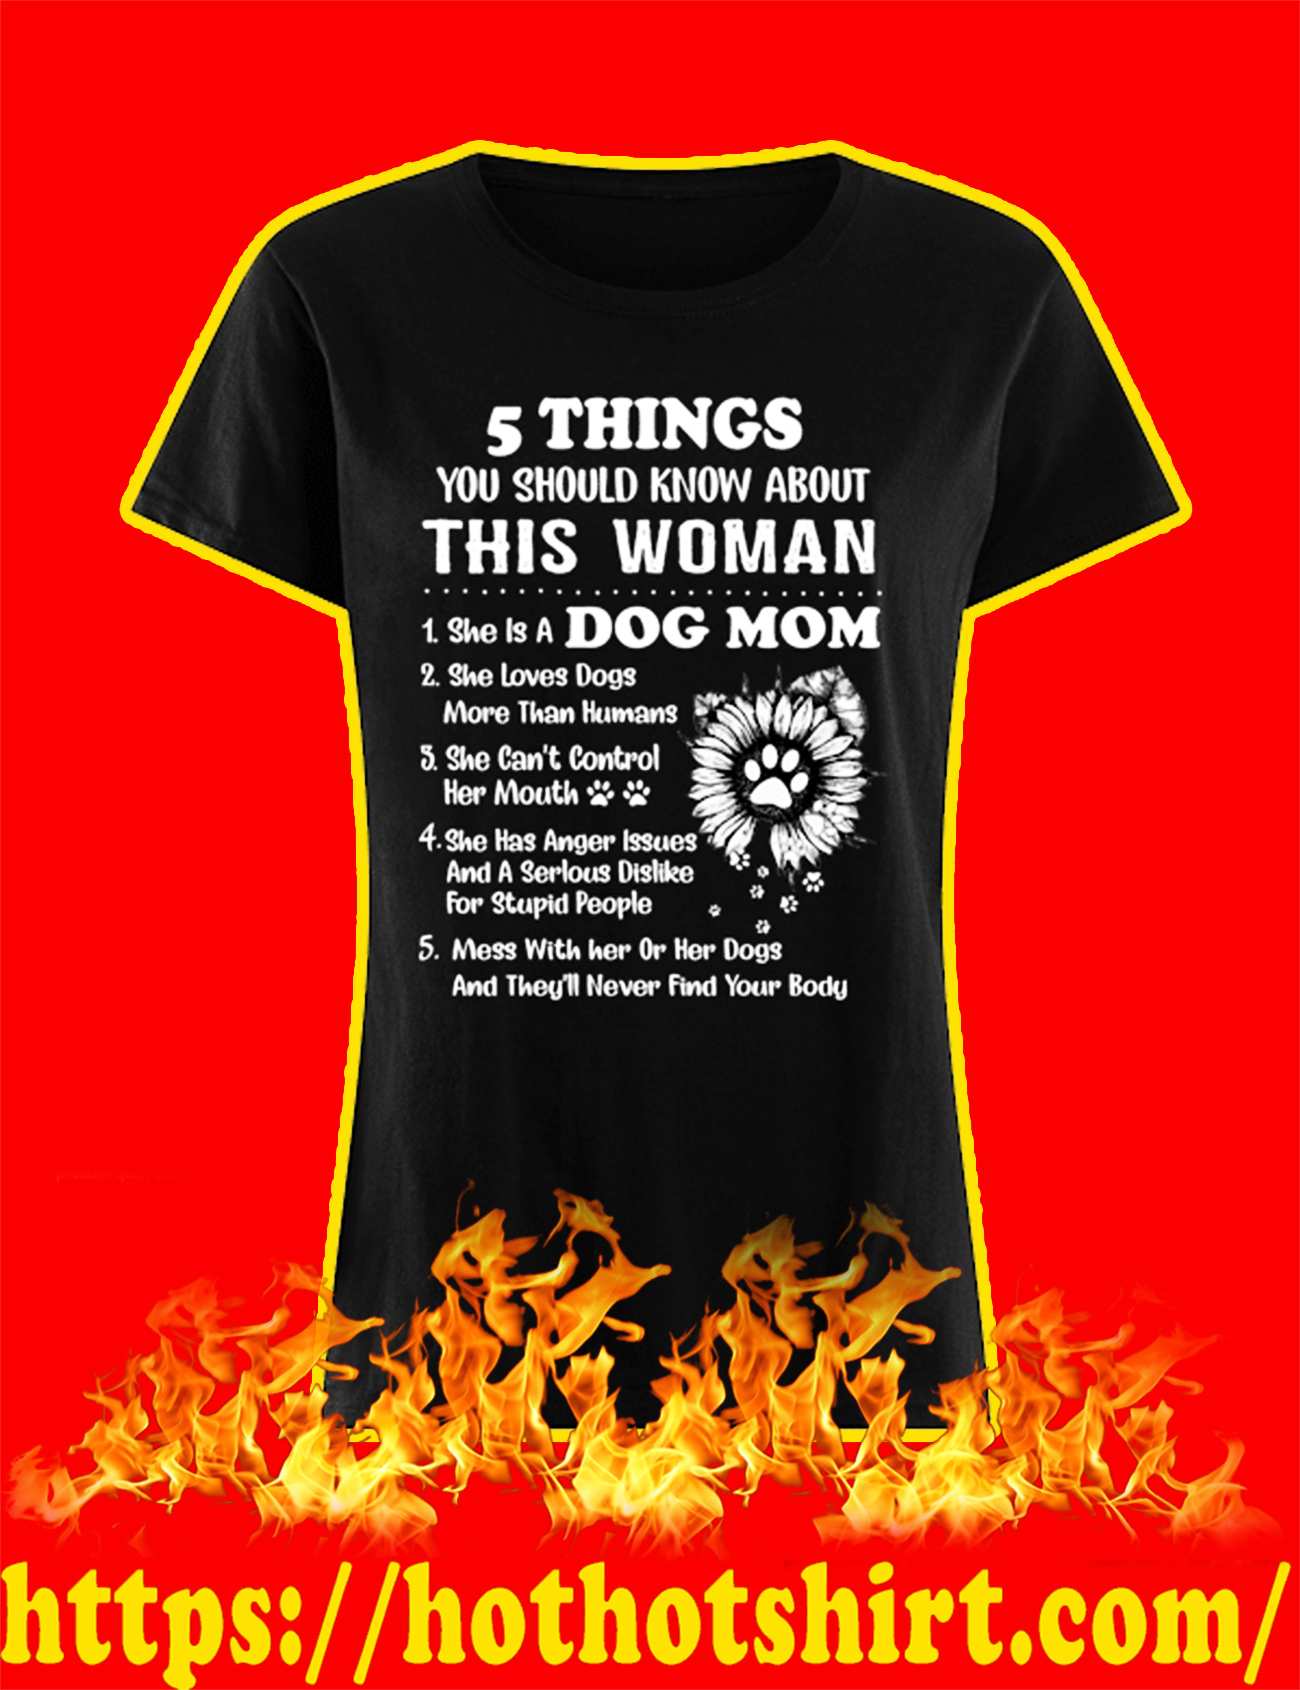 Dog Mom 5 Things You Should Know About This Woman Shirt, Long Sleeved Shirt And Tank Top